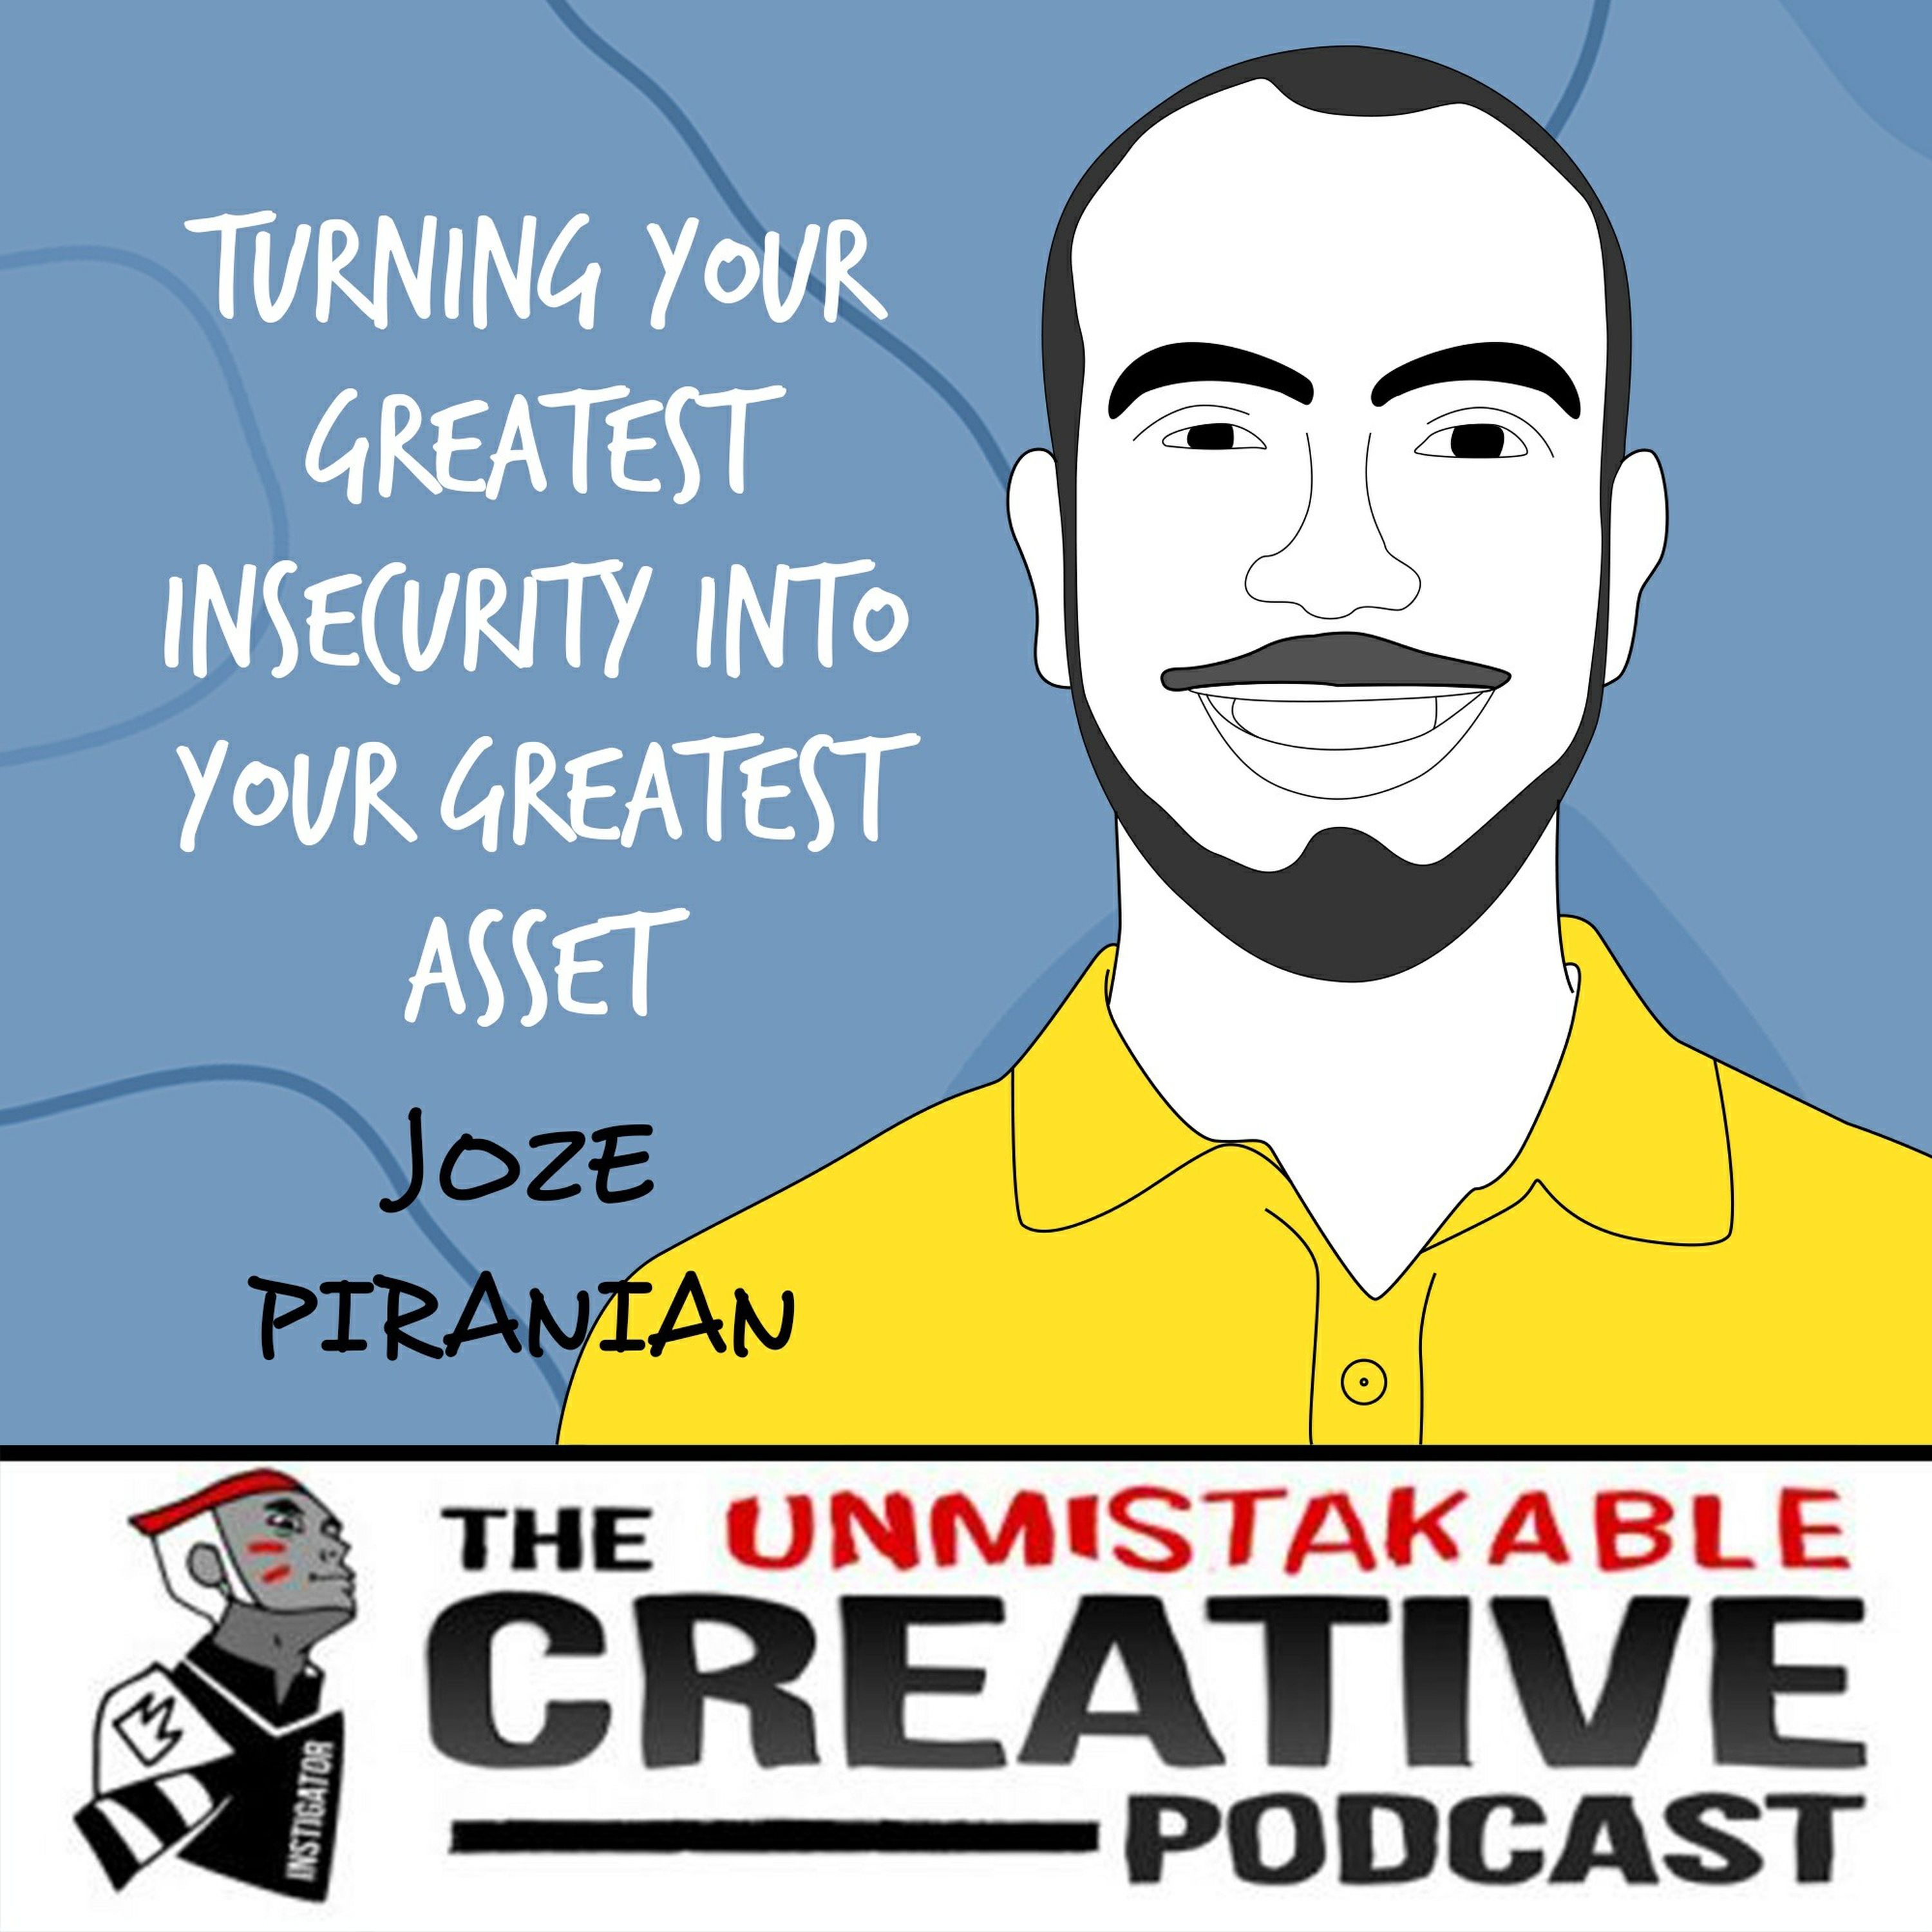 Joze Piranian | Turning Your Greatest Insecurity into Your Greatest Asset Image